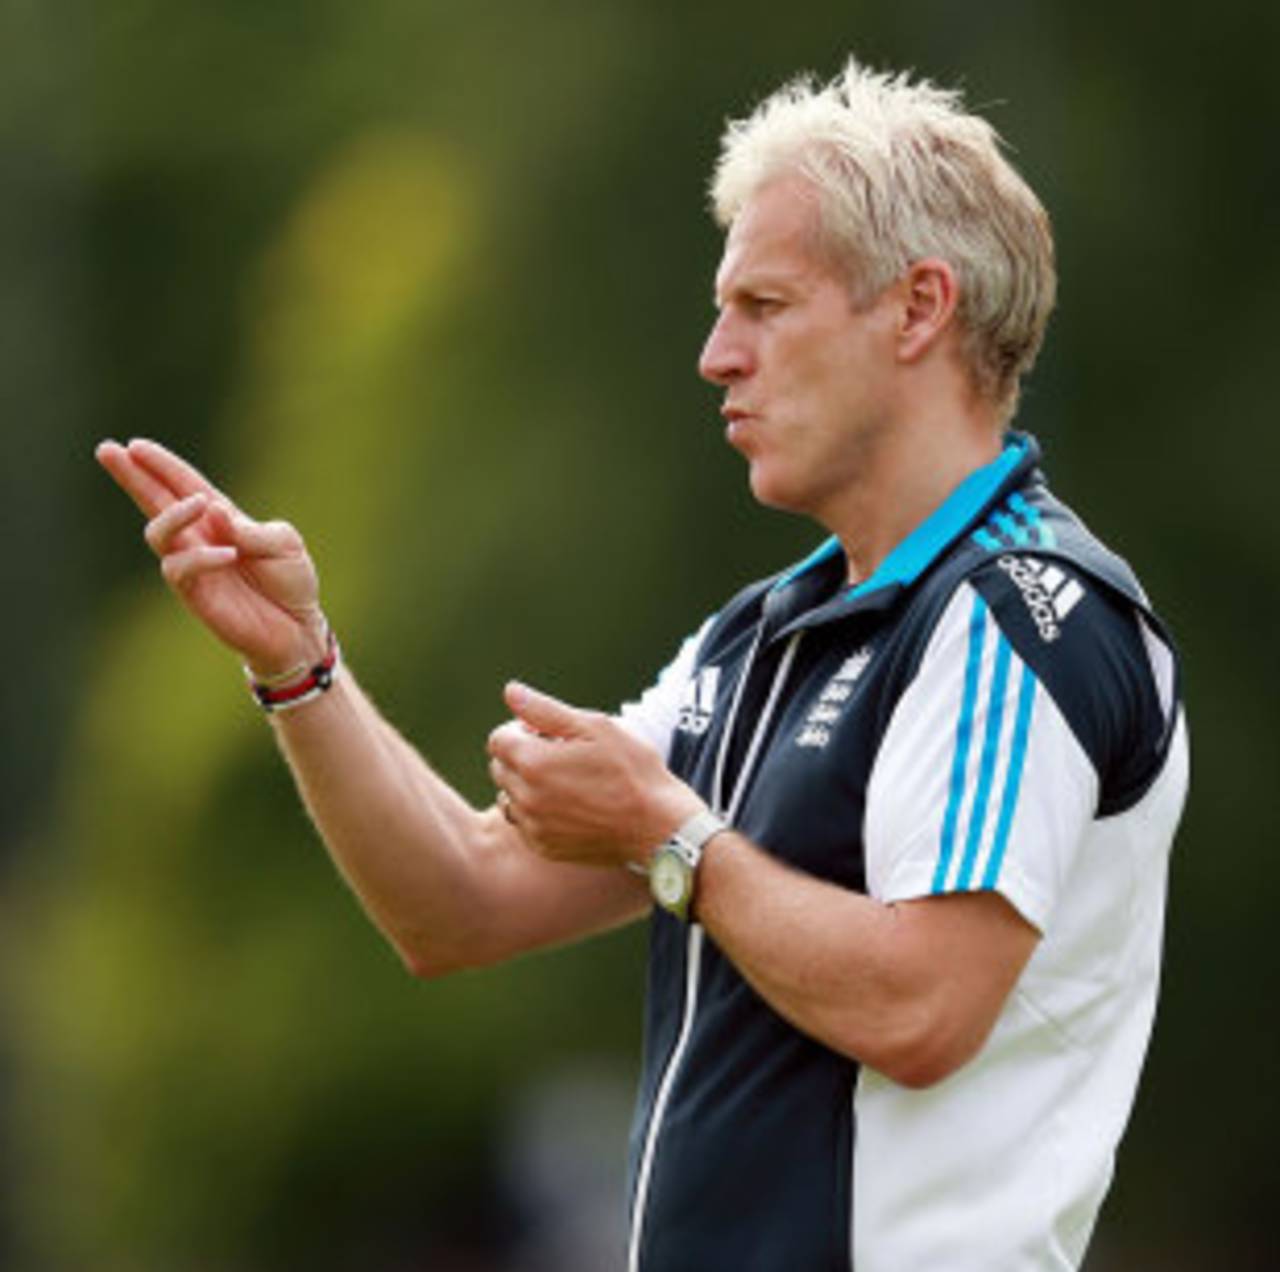 It has been an up and down start for Peter Moores in his second stint as England coach, Edgbaston, June 2, 2014